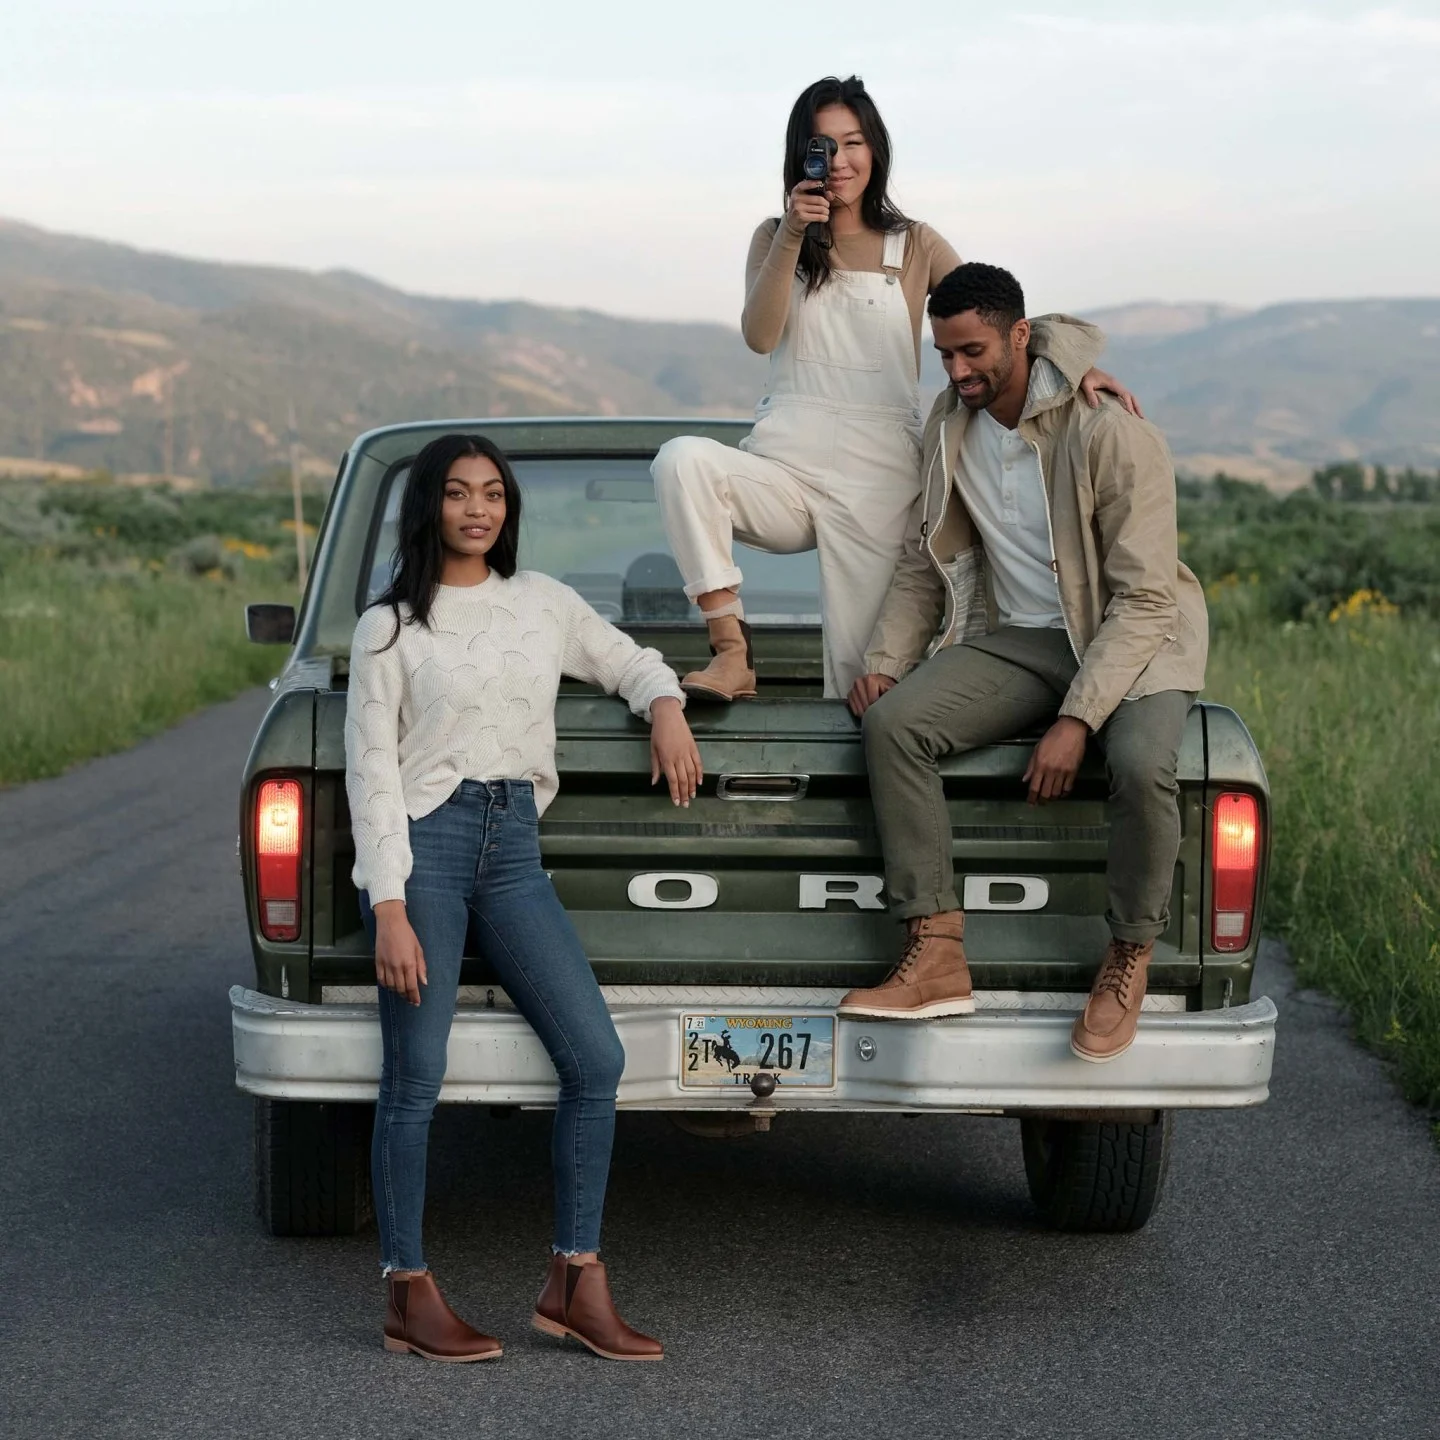 three people stand by truck bed wearing Nisolo shoes - Nisolo Publishes Minimum Wages